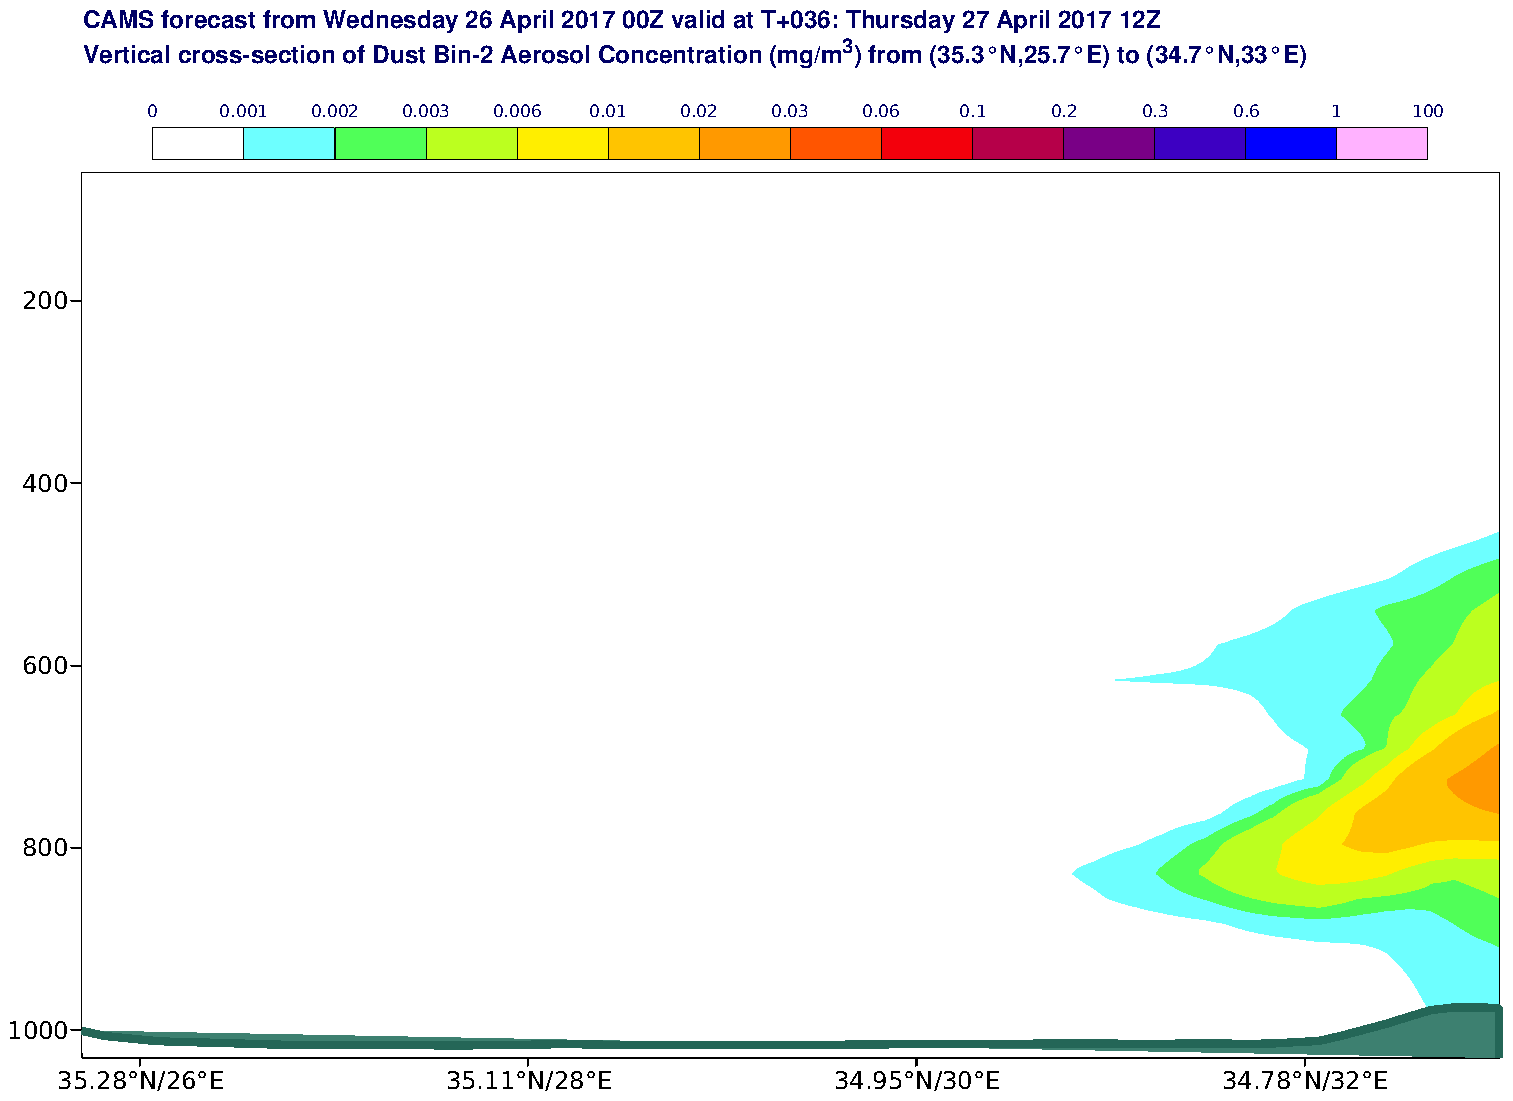 Vertical cross-section of Dust Bin-2 Aerosol Concentration (mg/m3) valid at T36 - 2017-04-27 12:00